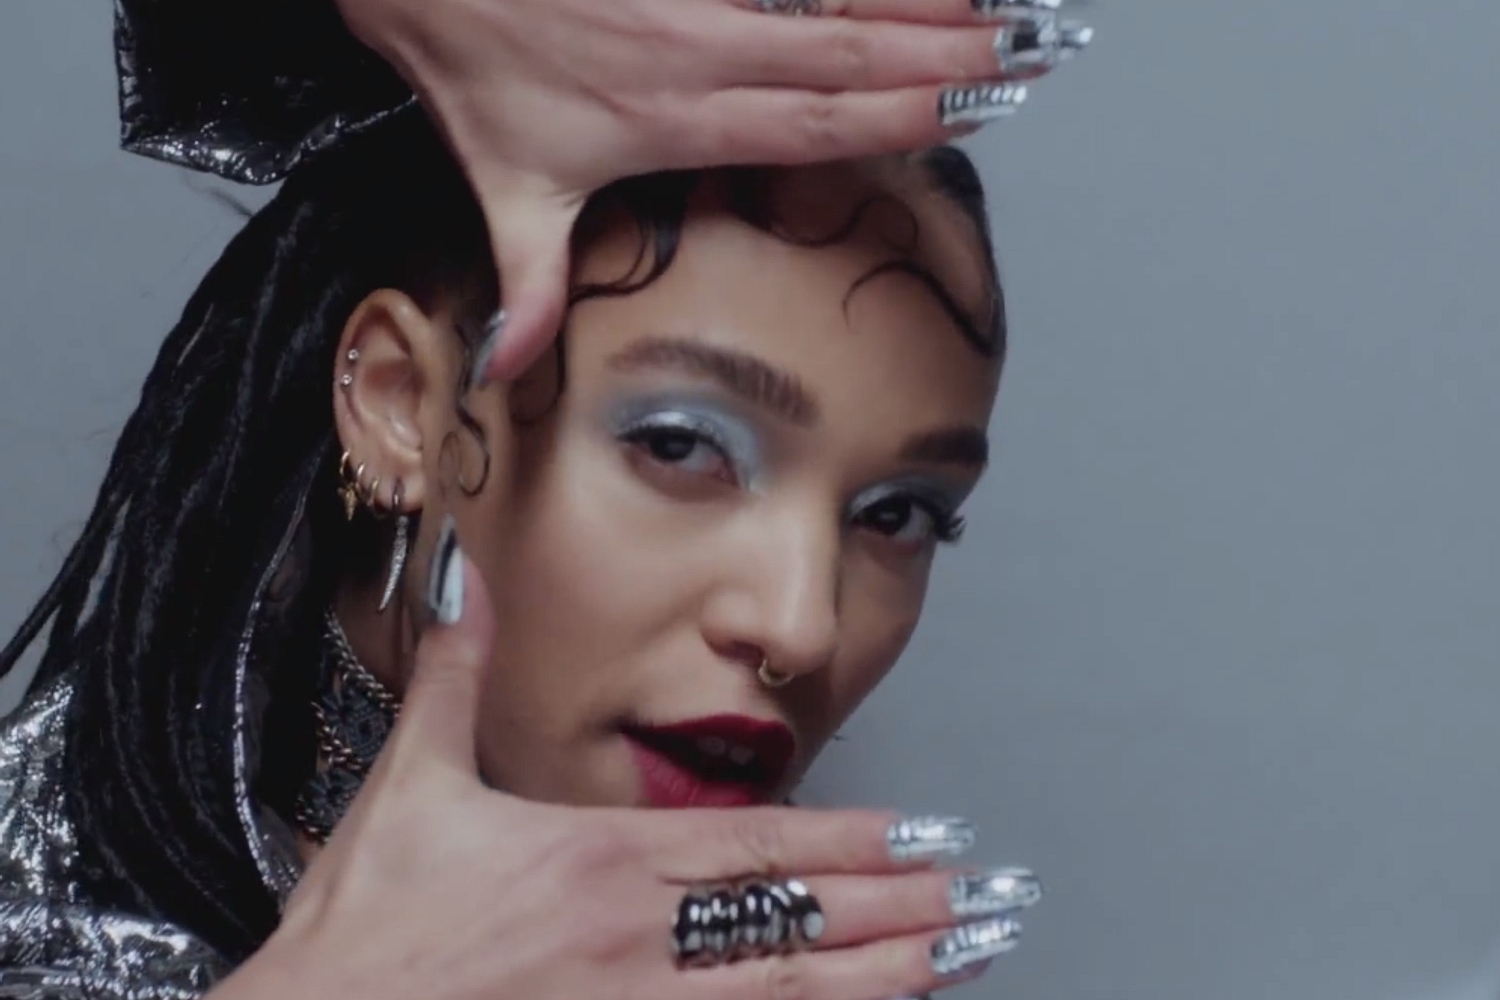 “I think this could be my last interview,” FKA twigs tells Sunday Times journalist